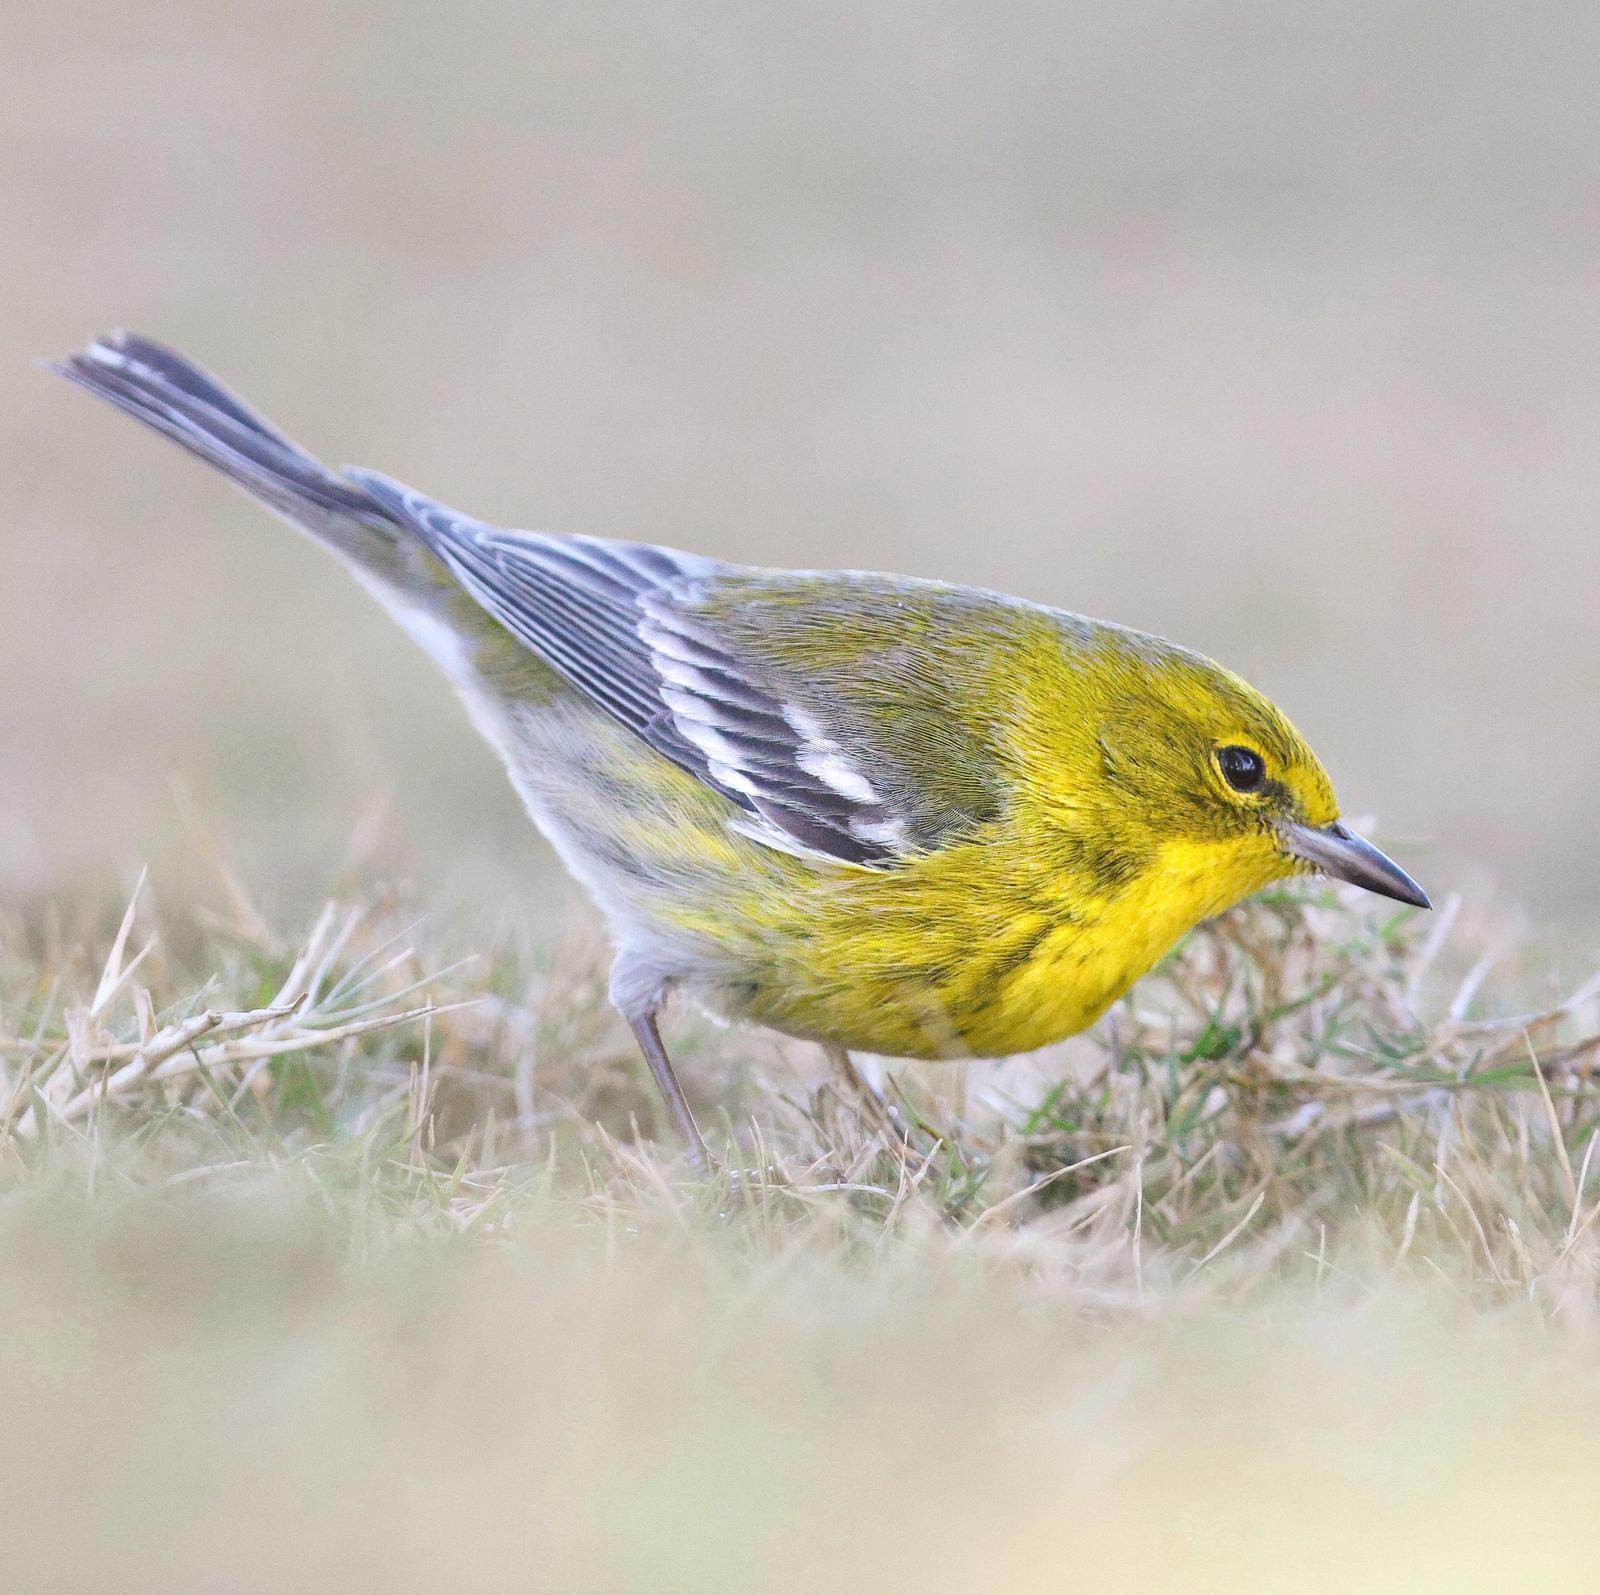 Pine Warbler Photo by Tom Ford-Hutchinson